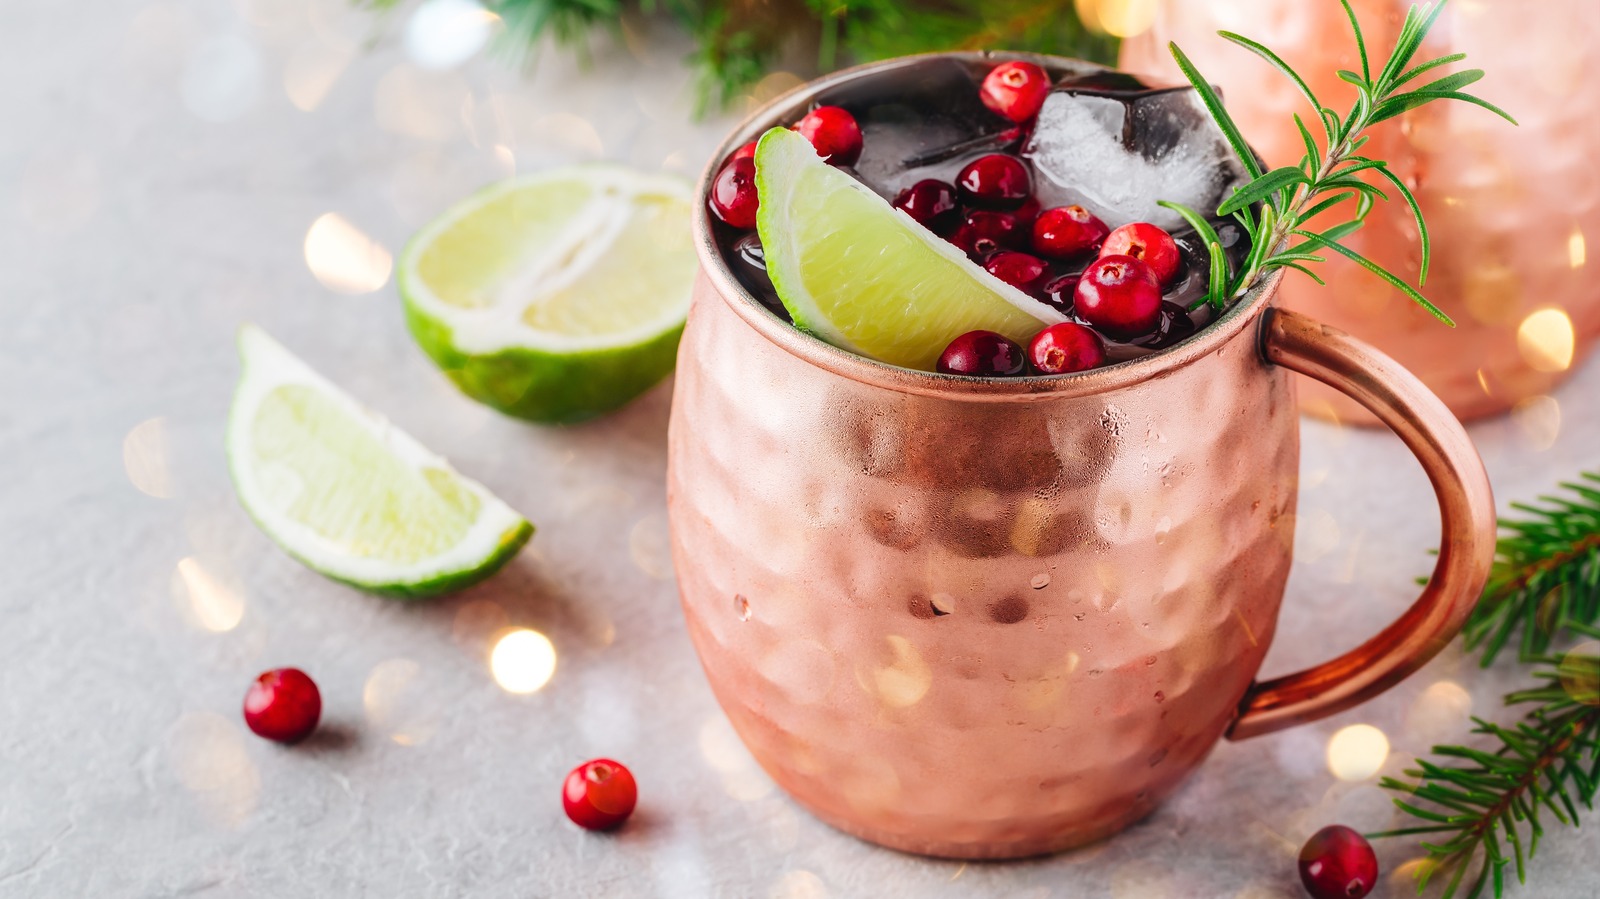 https://www.thedailymeal.com/img/gallery/chill-festive-holiday-cocktails-with-fancy-cranberry-ice-cubes/l-intro-1699544551.jpg